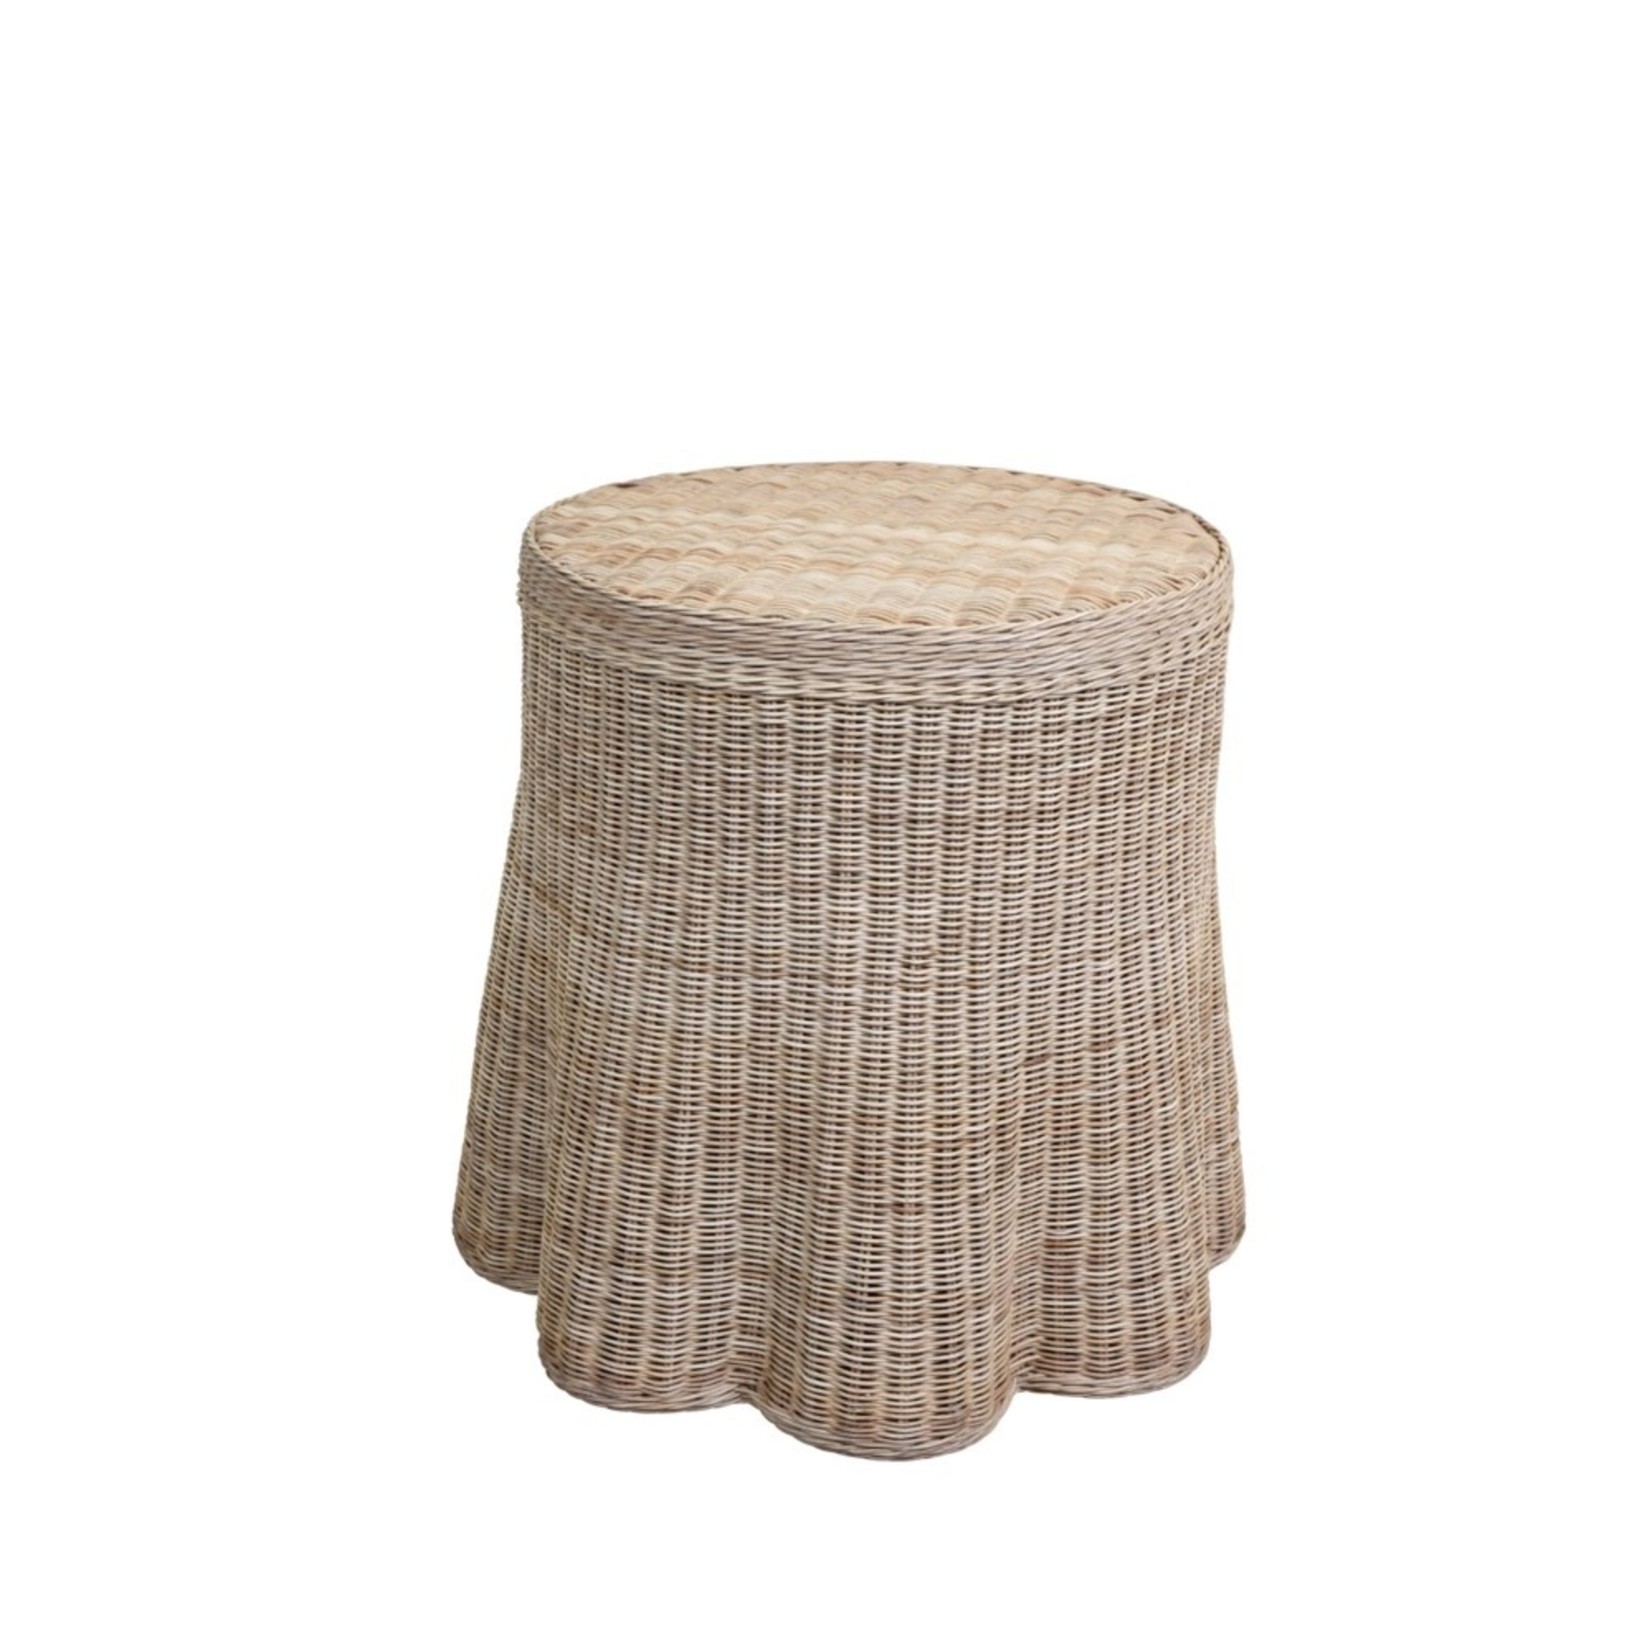 Mainly Baskets Scallop Side Table - Natural